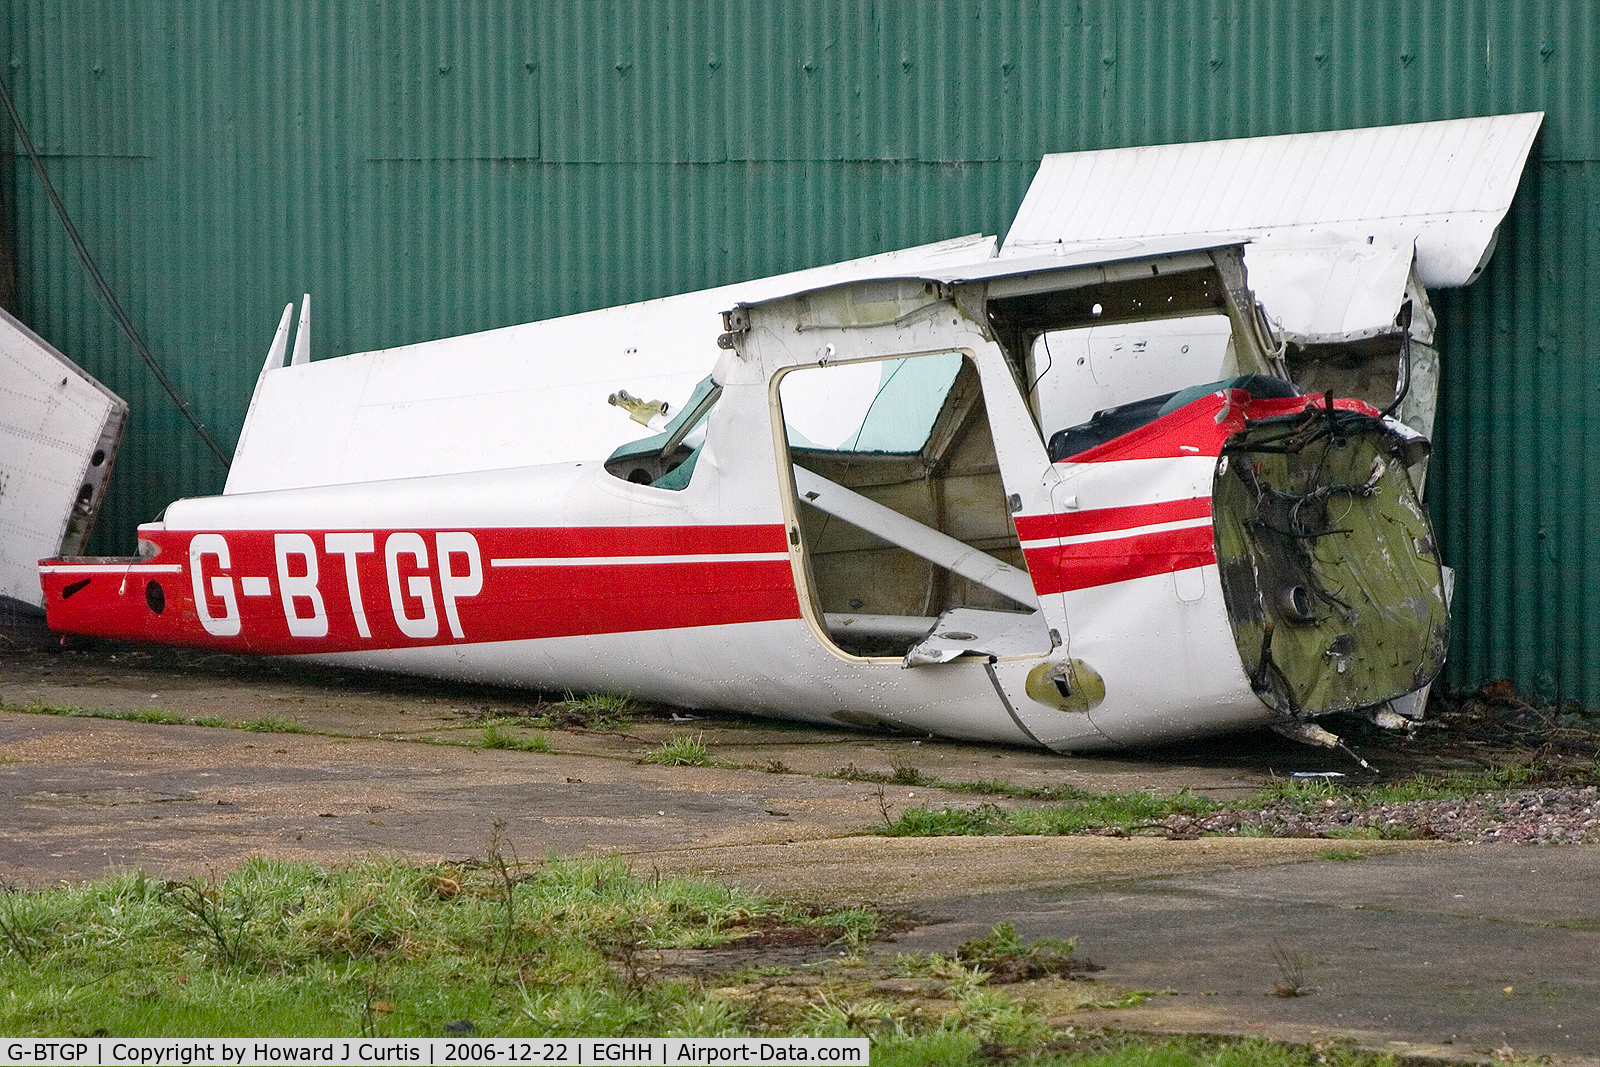 G-BTGP, 1976 Cessna 150M C/N 150-78921, Privately owned. In pieces outside Airtime.